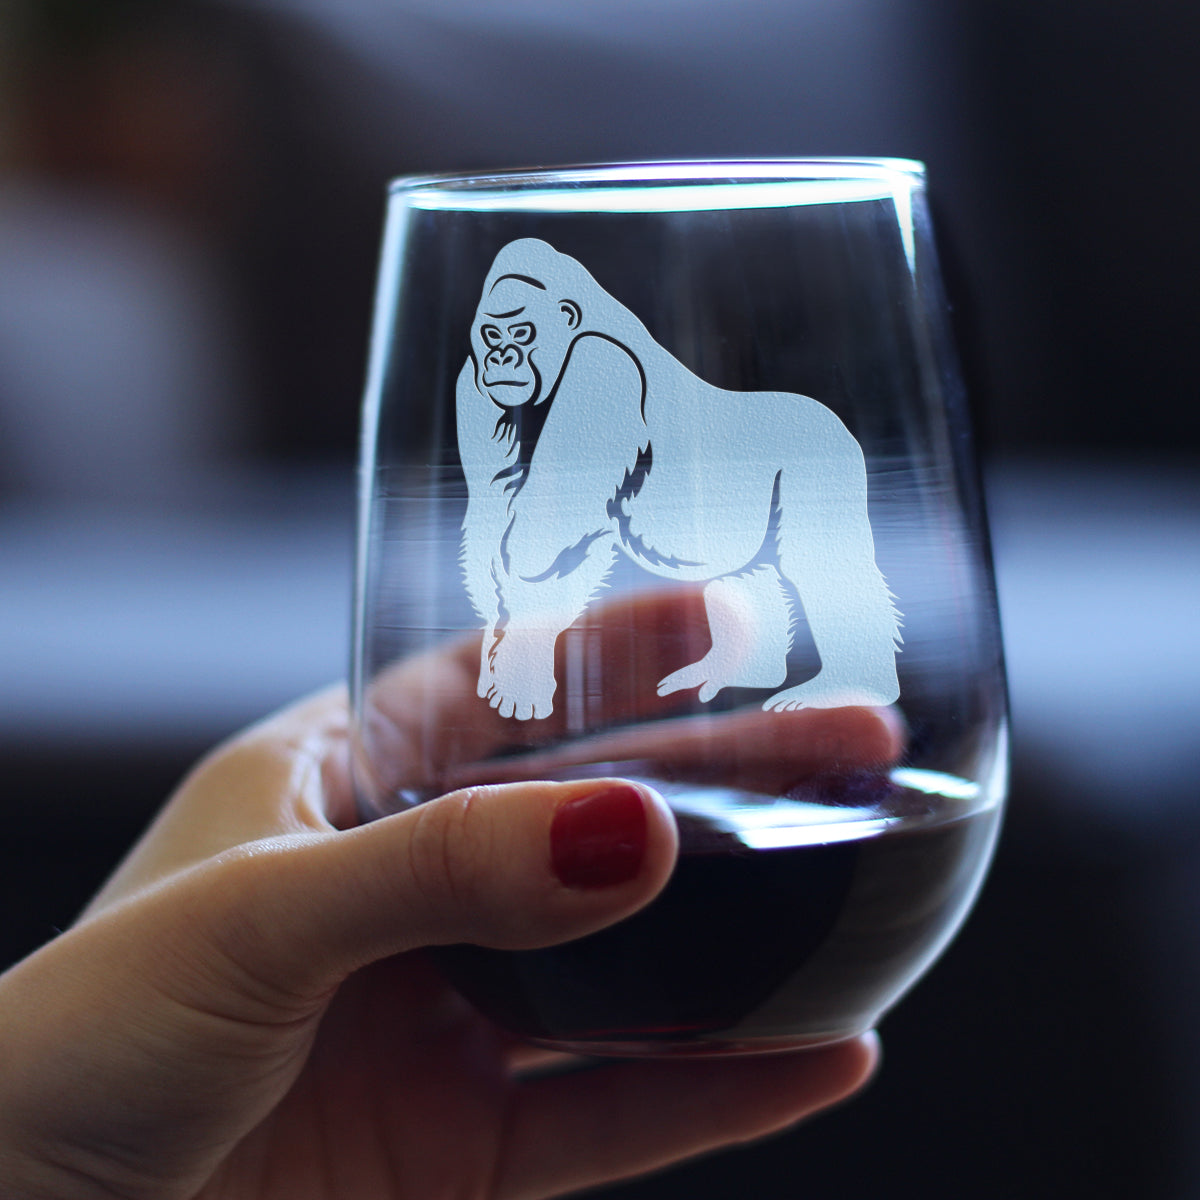 Gorilla Stemless Wine Glass - Fun Wild Animal Themed Decor and Gifts for Lovers of Apes and Monkeys - Large 17 Oz Glasses